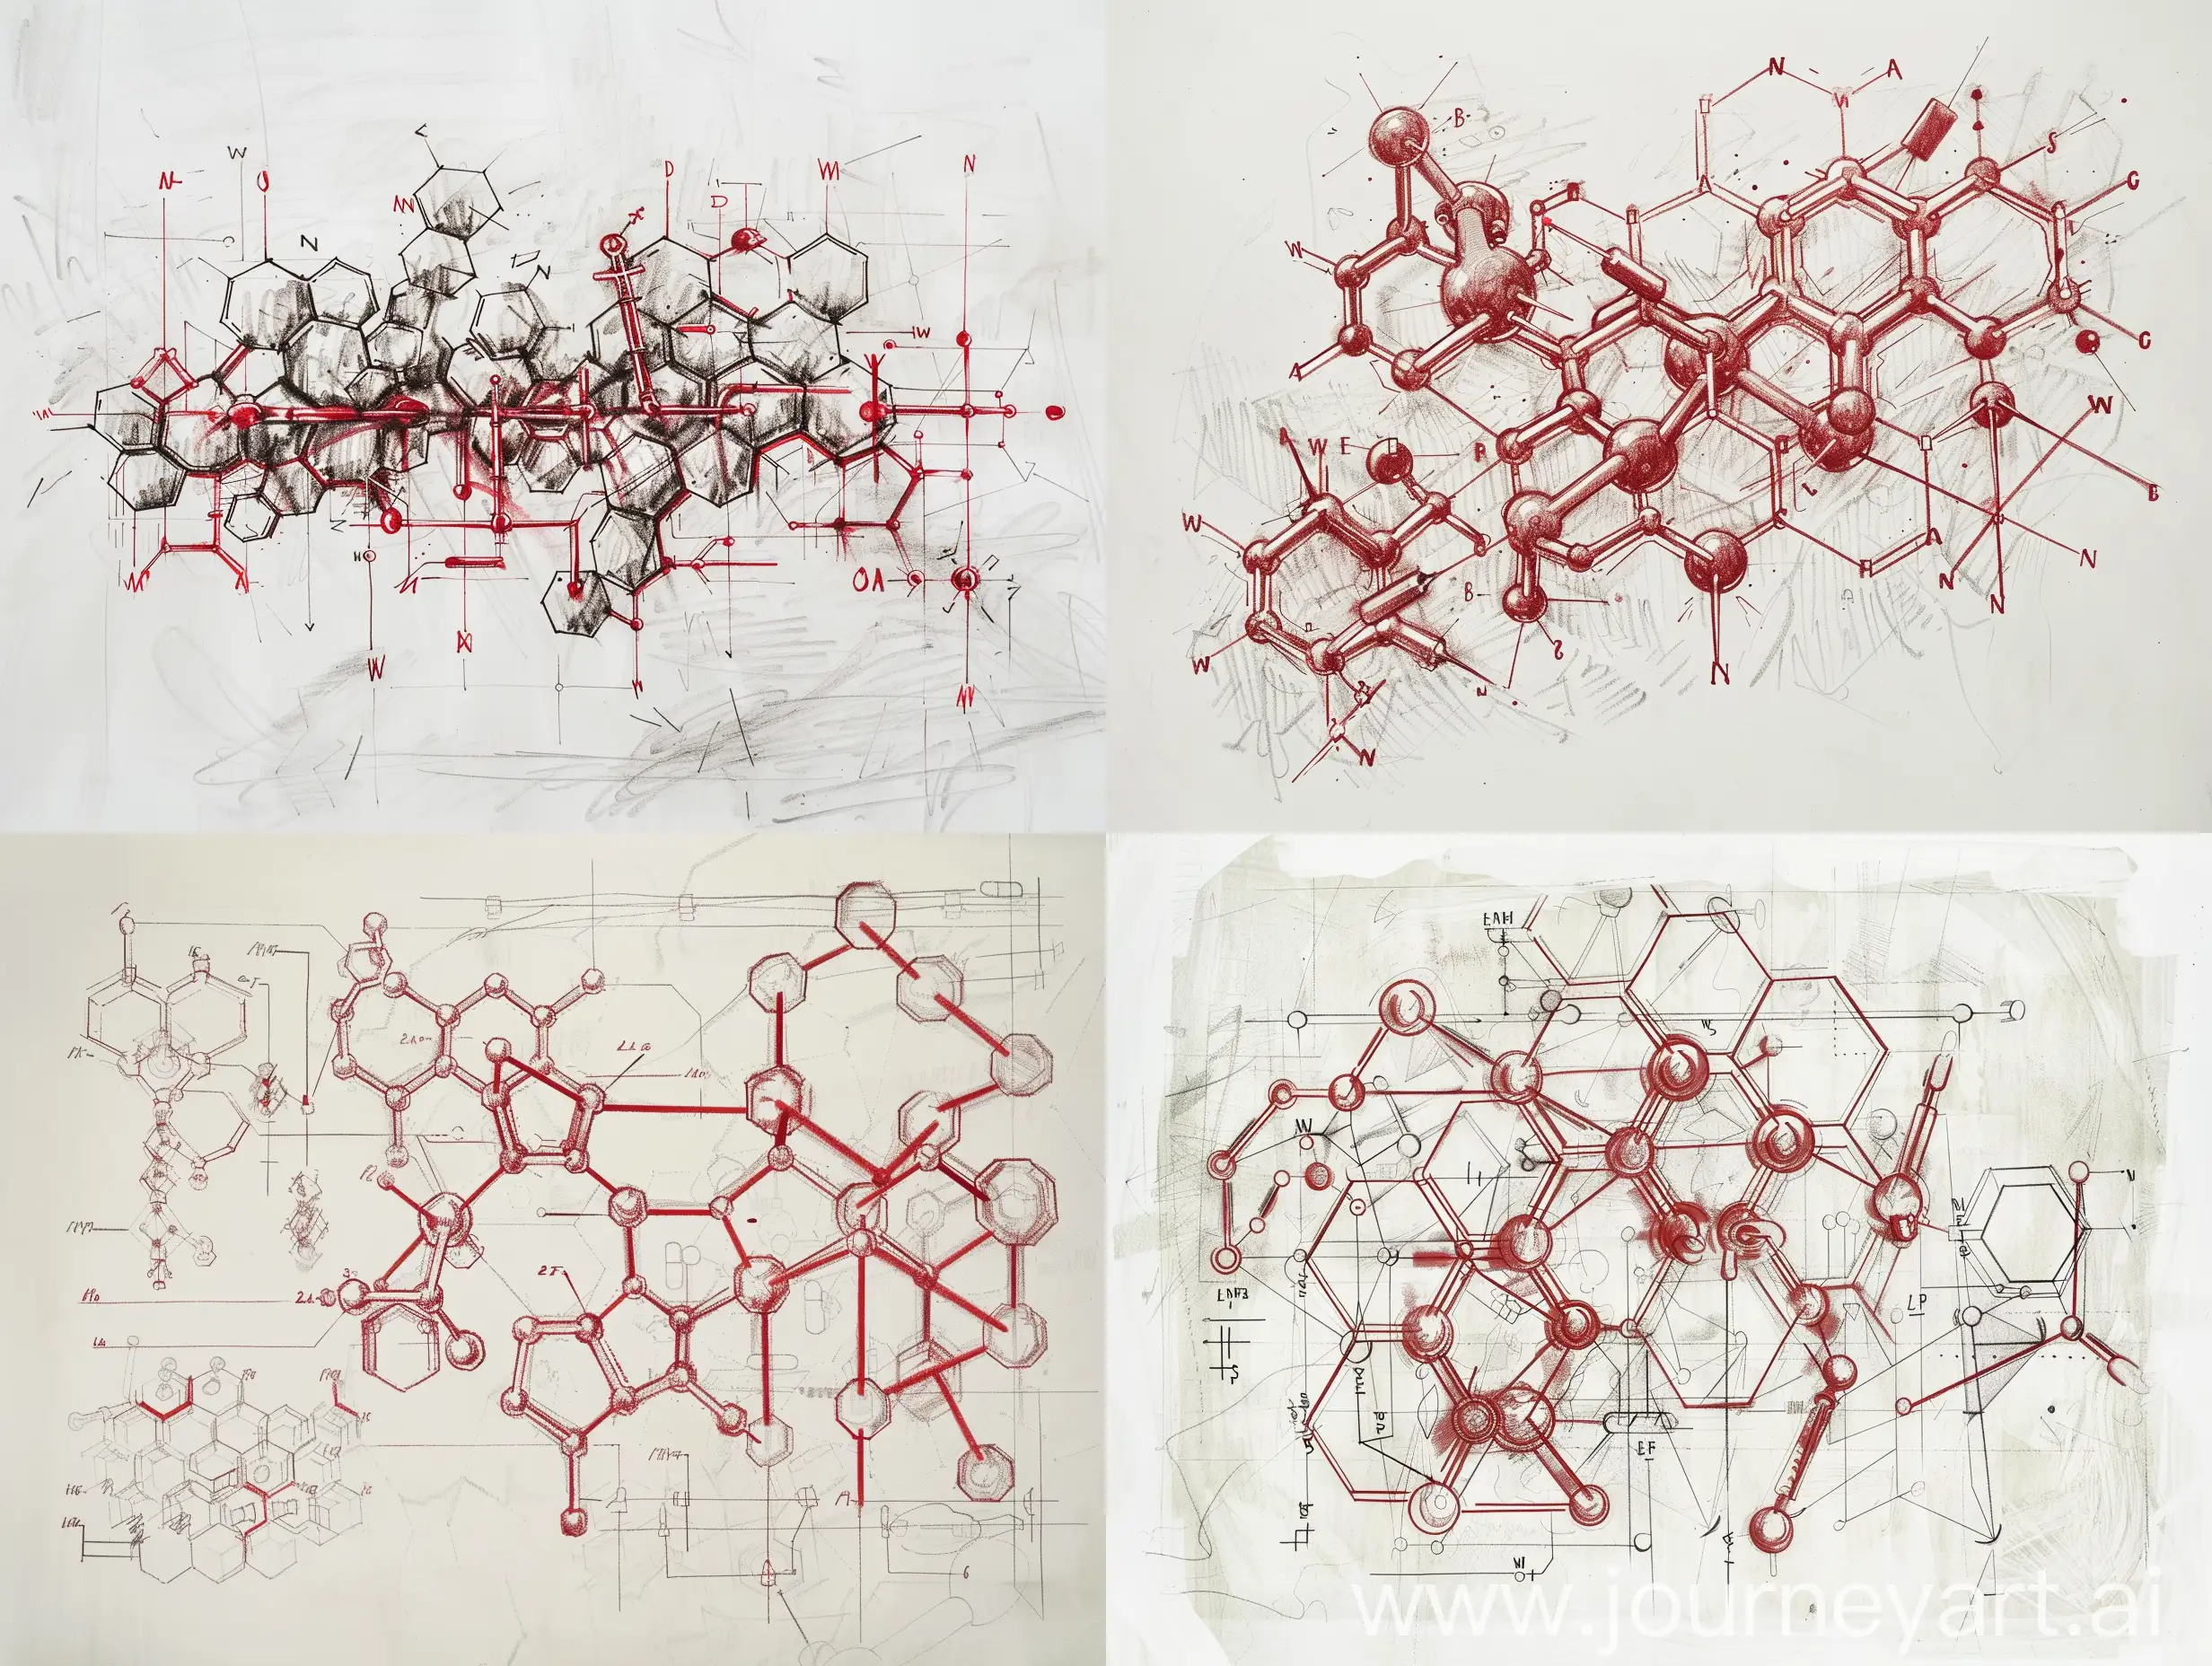 labeled diagrams of chemical structures for anti-aging medicine, pencil sketch, white background, red ink.